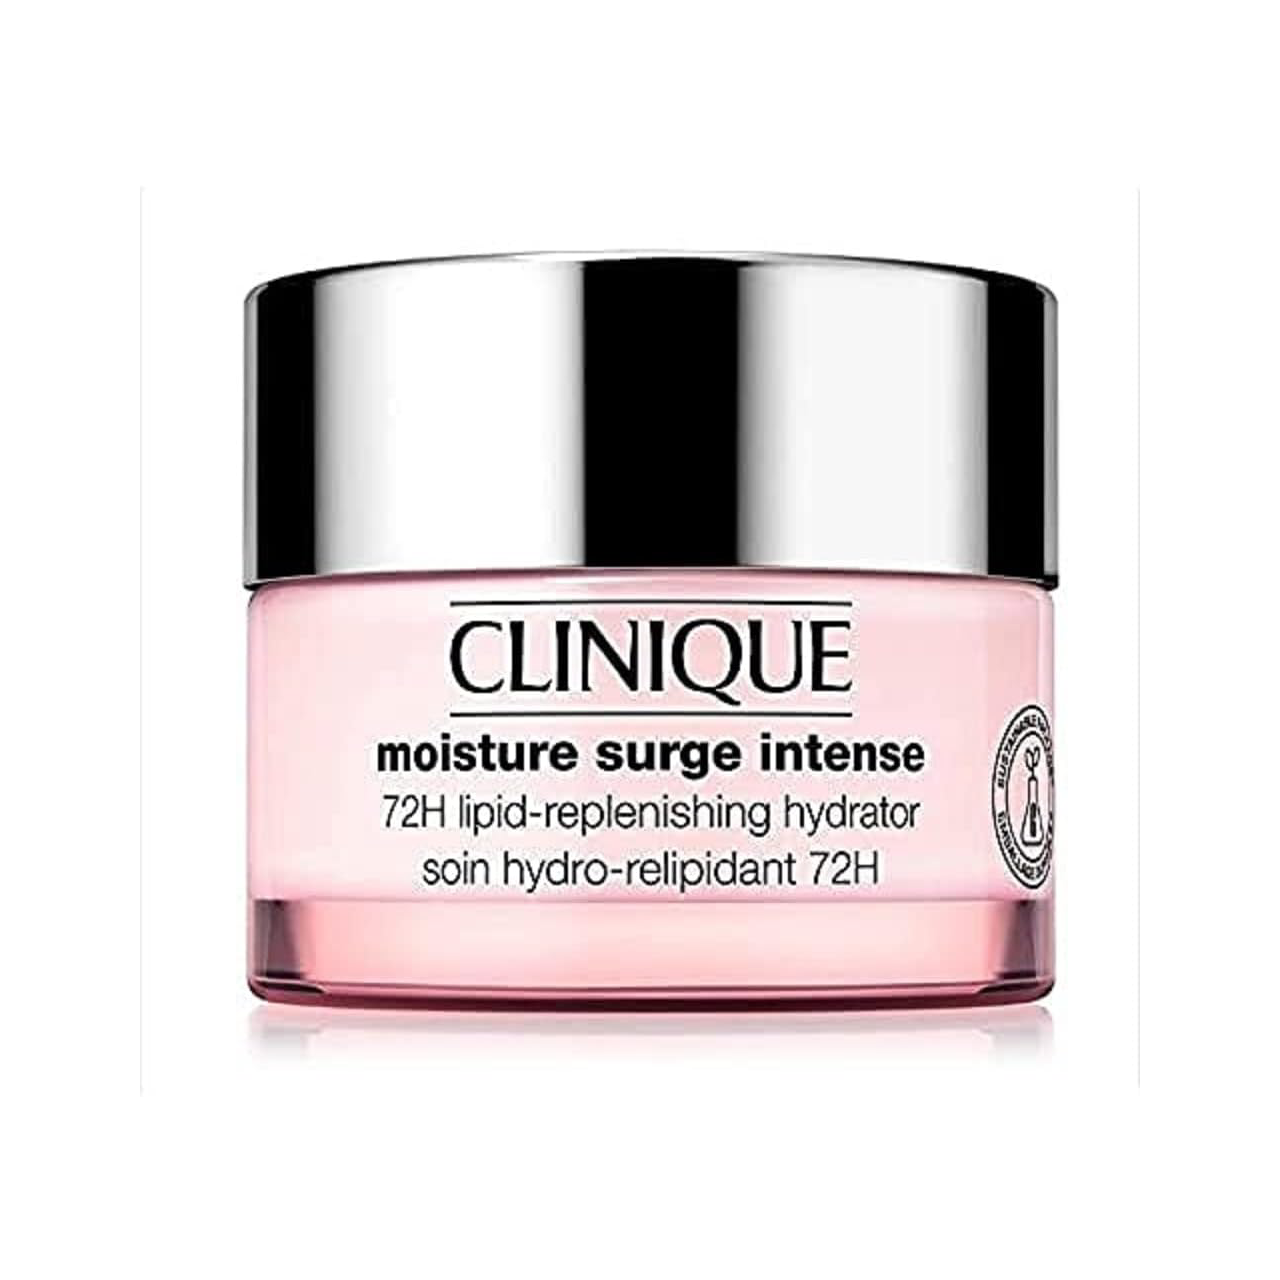 Jar of Clinique Moisture Surge 72-Hour Auto-Replenishing Hydrator on a white background